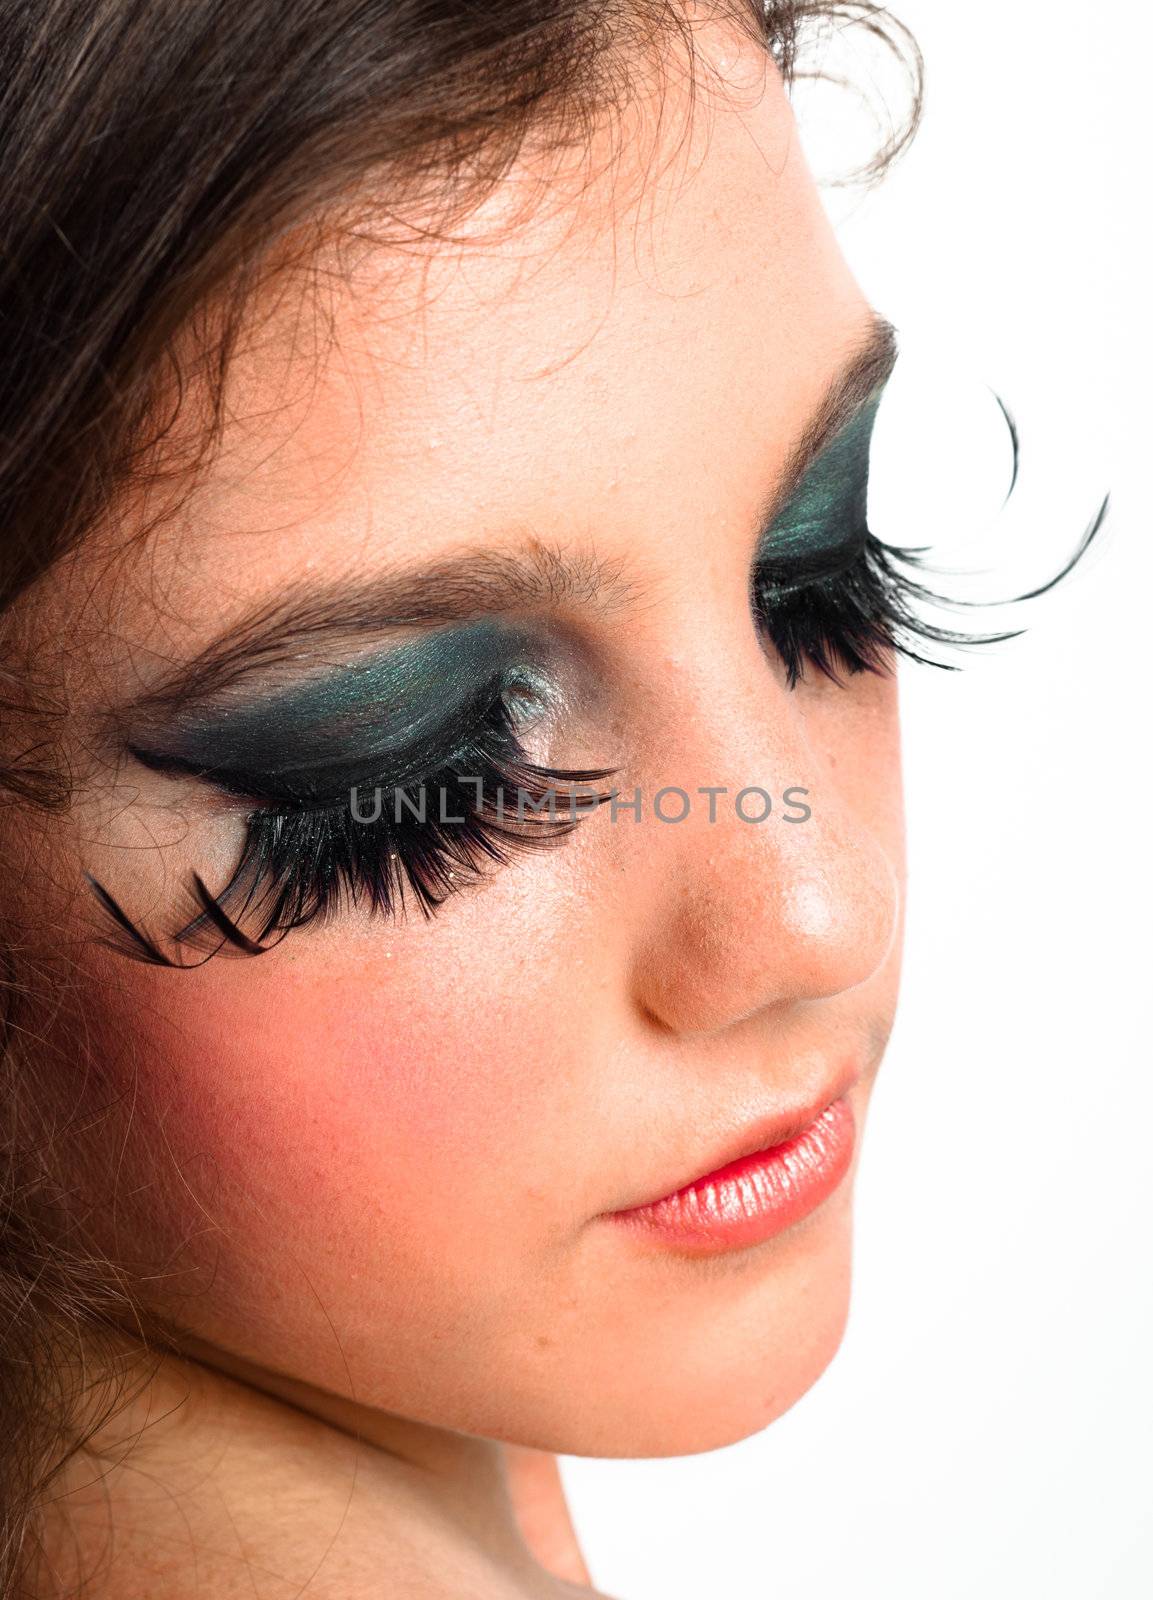 Nighlife makeup on a young girl by svedoliver